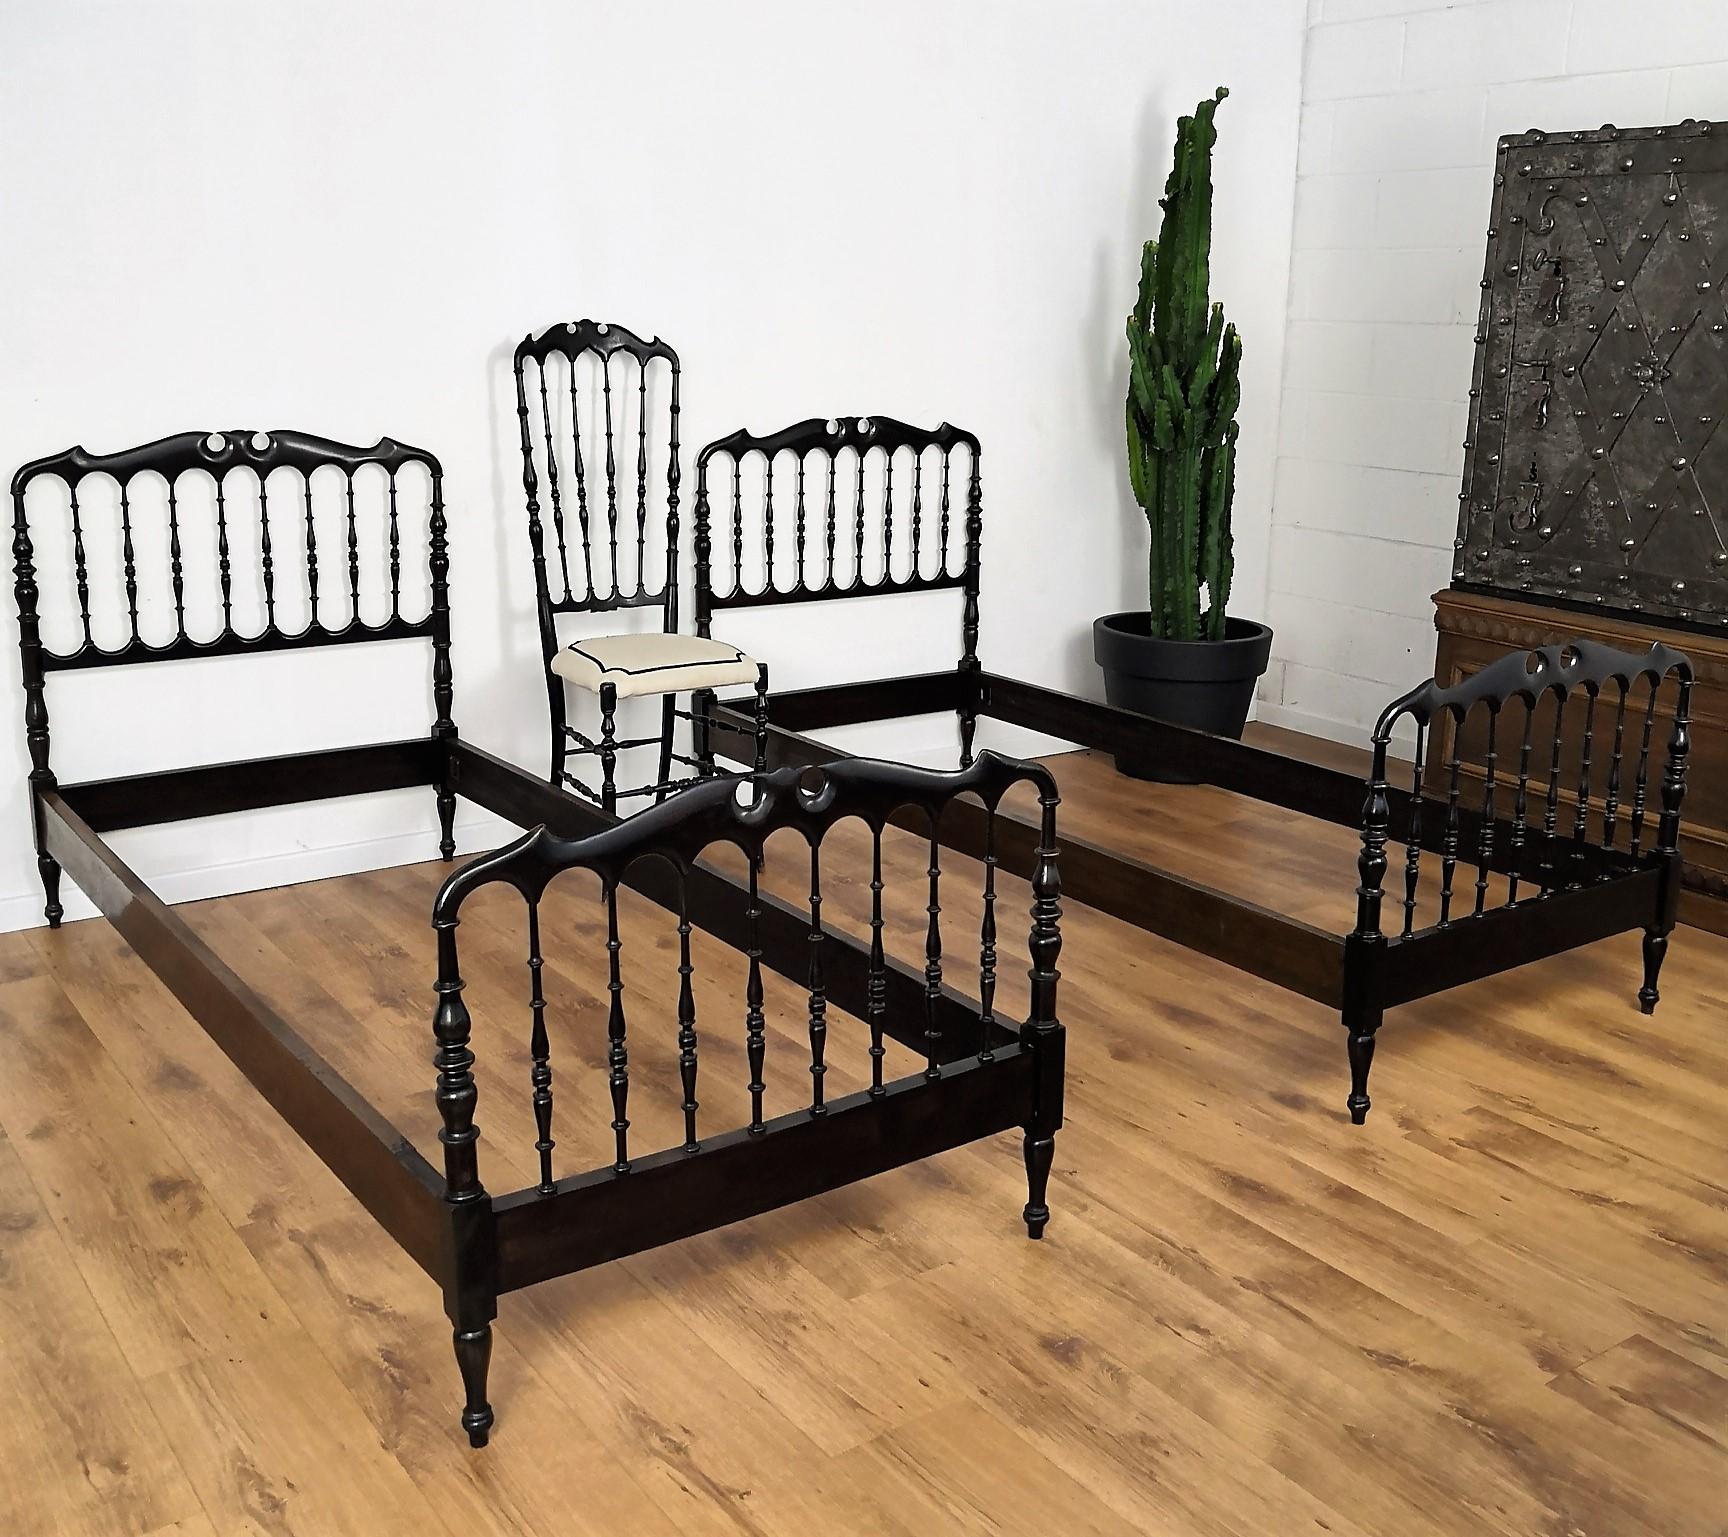 Pair of 1960s Italian Chiavari twin single beds in dark carved wood with great shiny vintage patina and perfect long lasting solid structure. Chiavari style, mainly known for the chairs, is named after the Italian city where they originated, a small